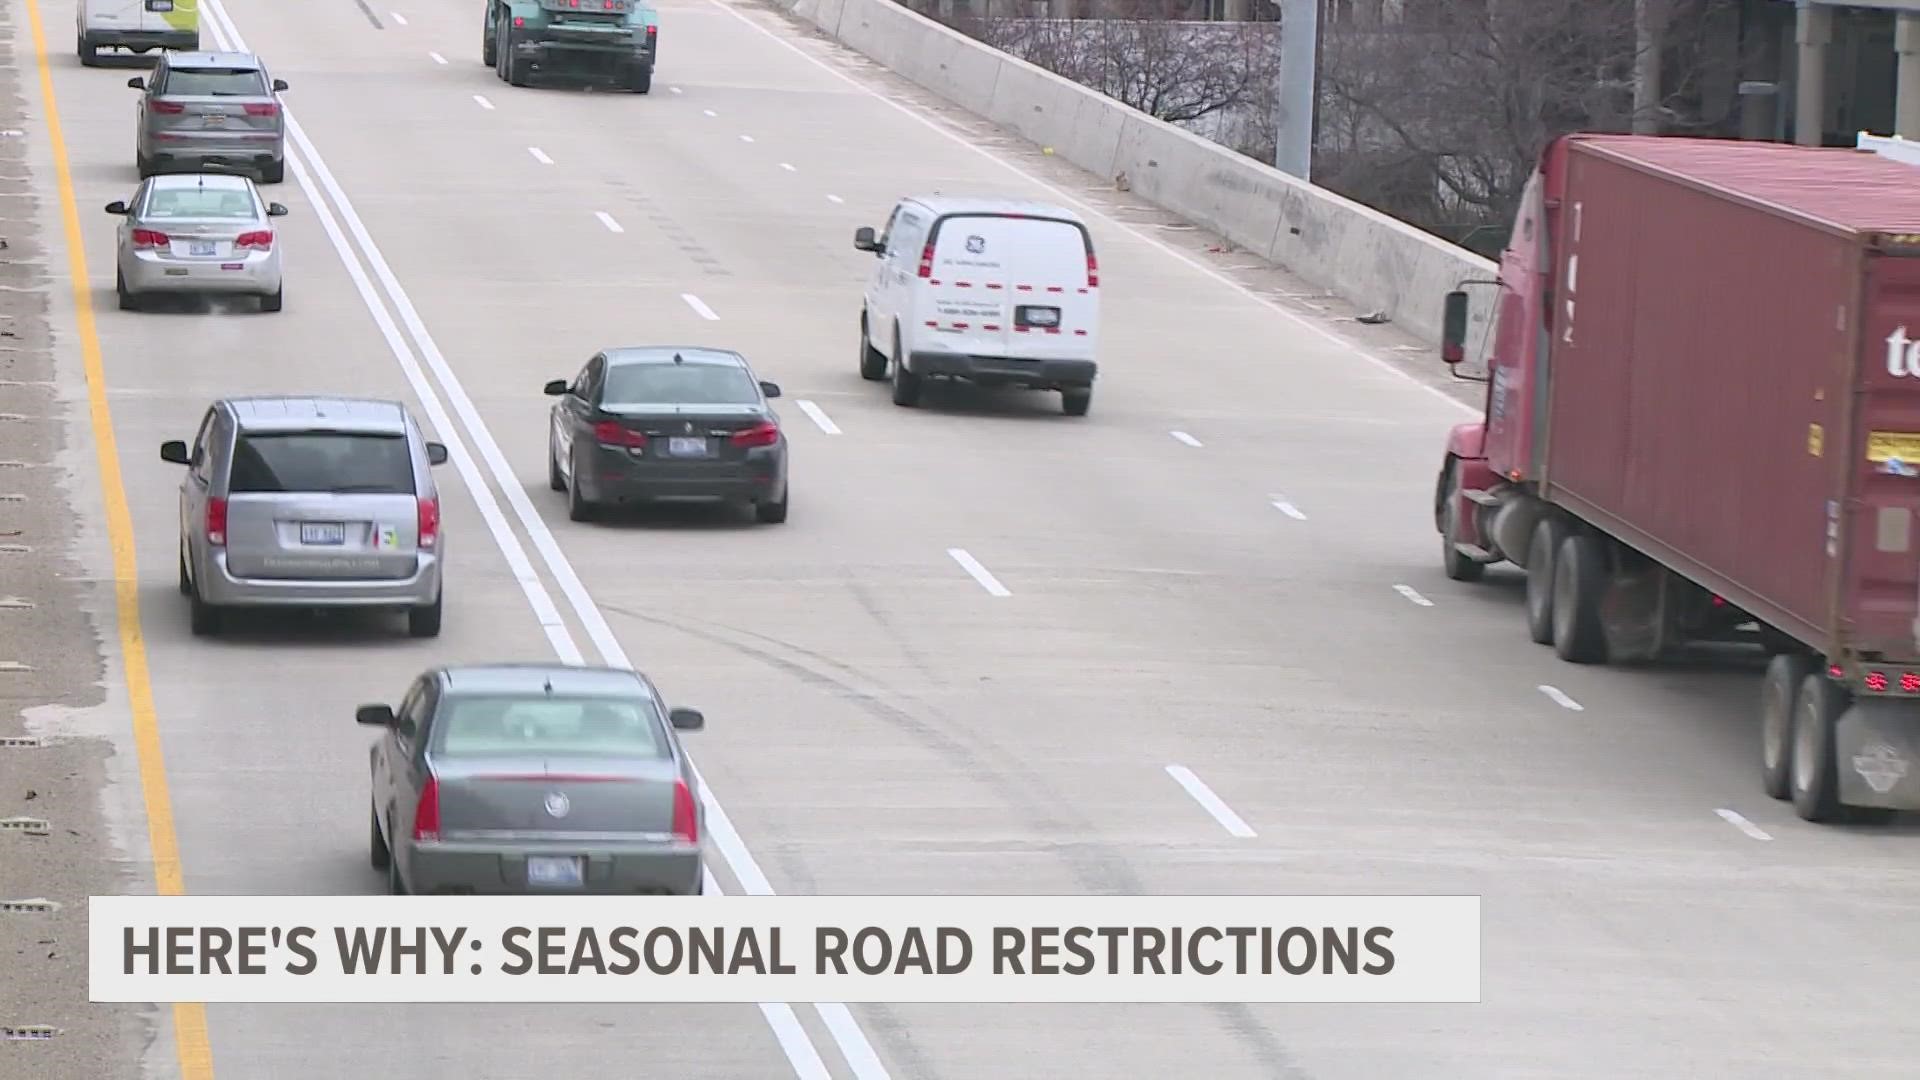 If you've been on the highway this week, you've likely seen the signs advising that seasonal weight restrictions are in effect on West Michigan roads.